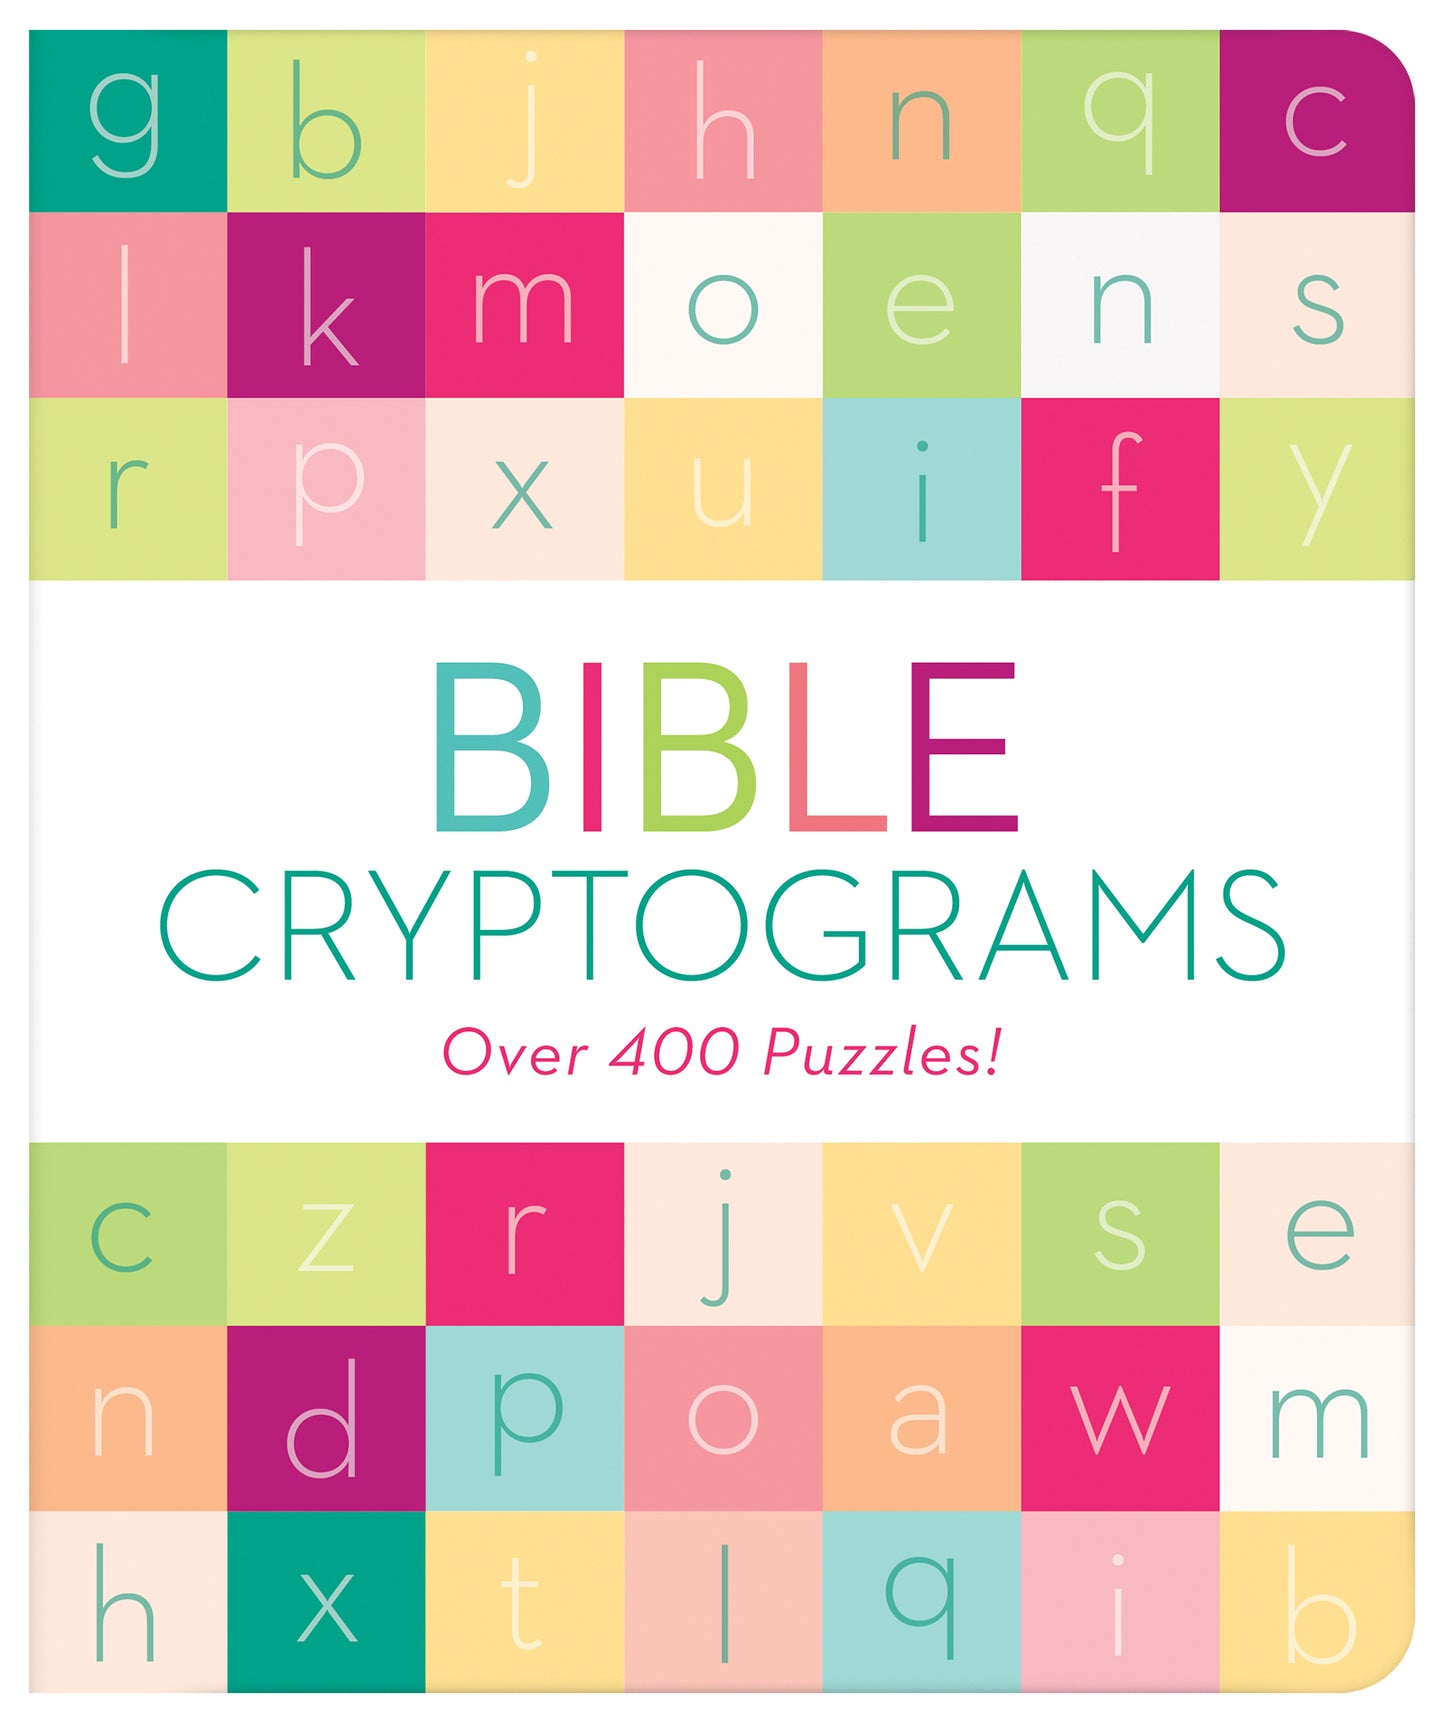 Bible Cryptograms - The Christian Gift Company